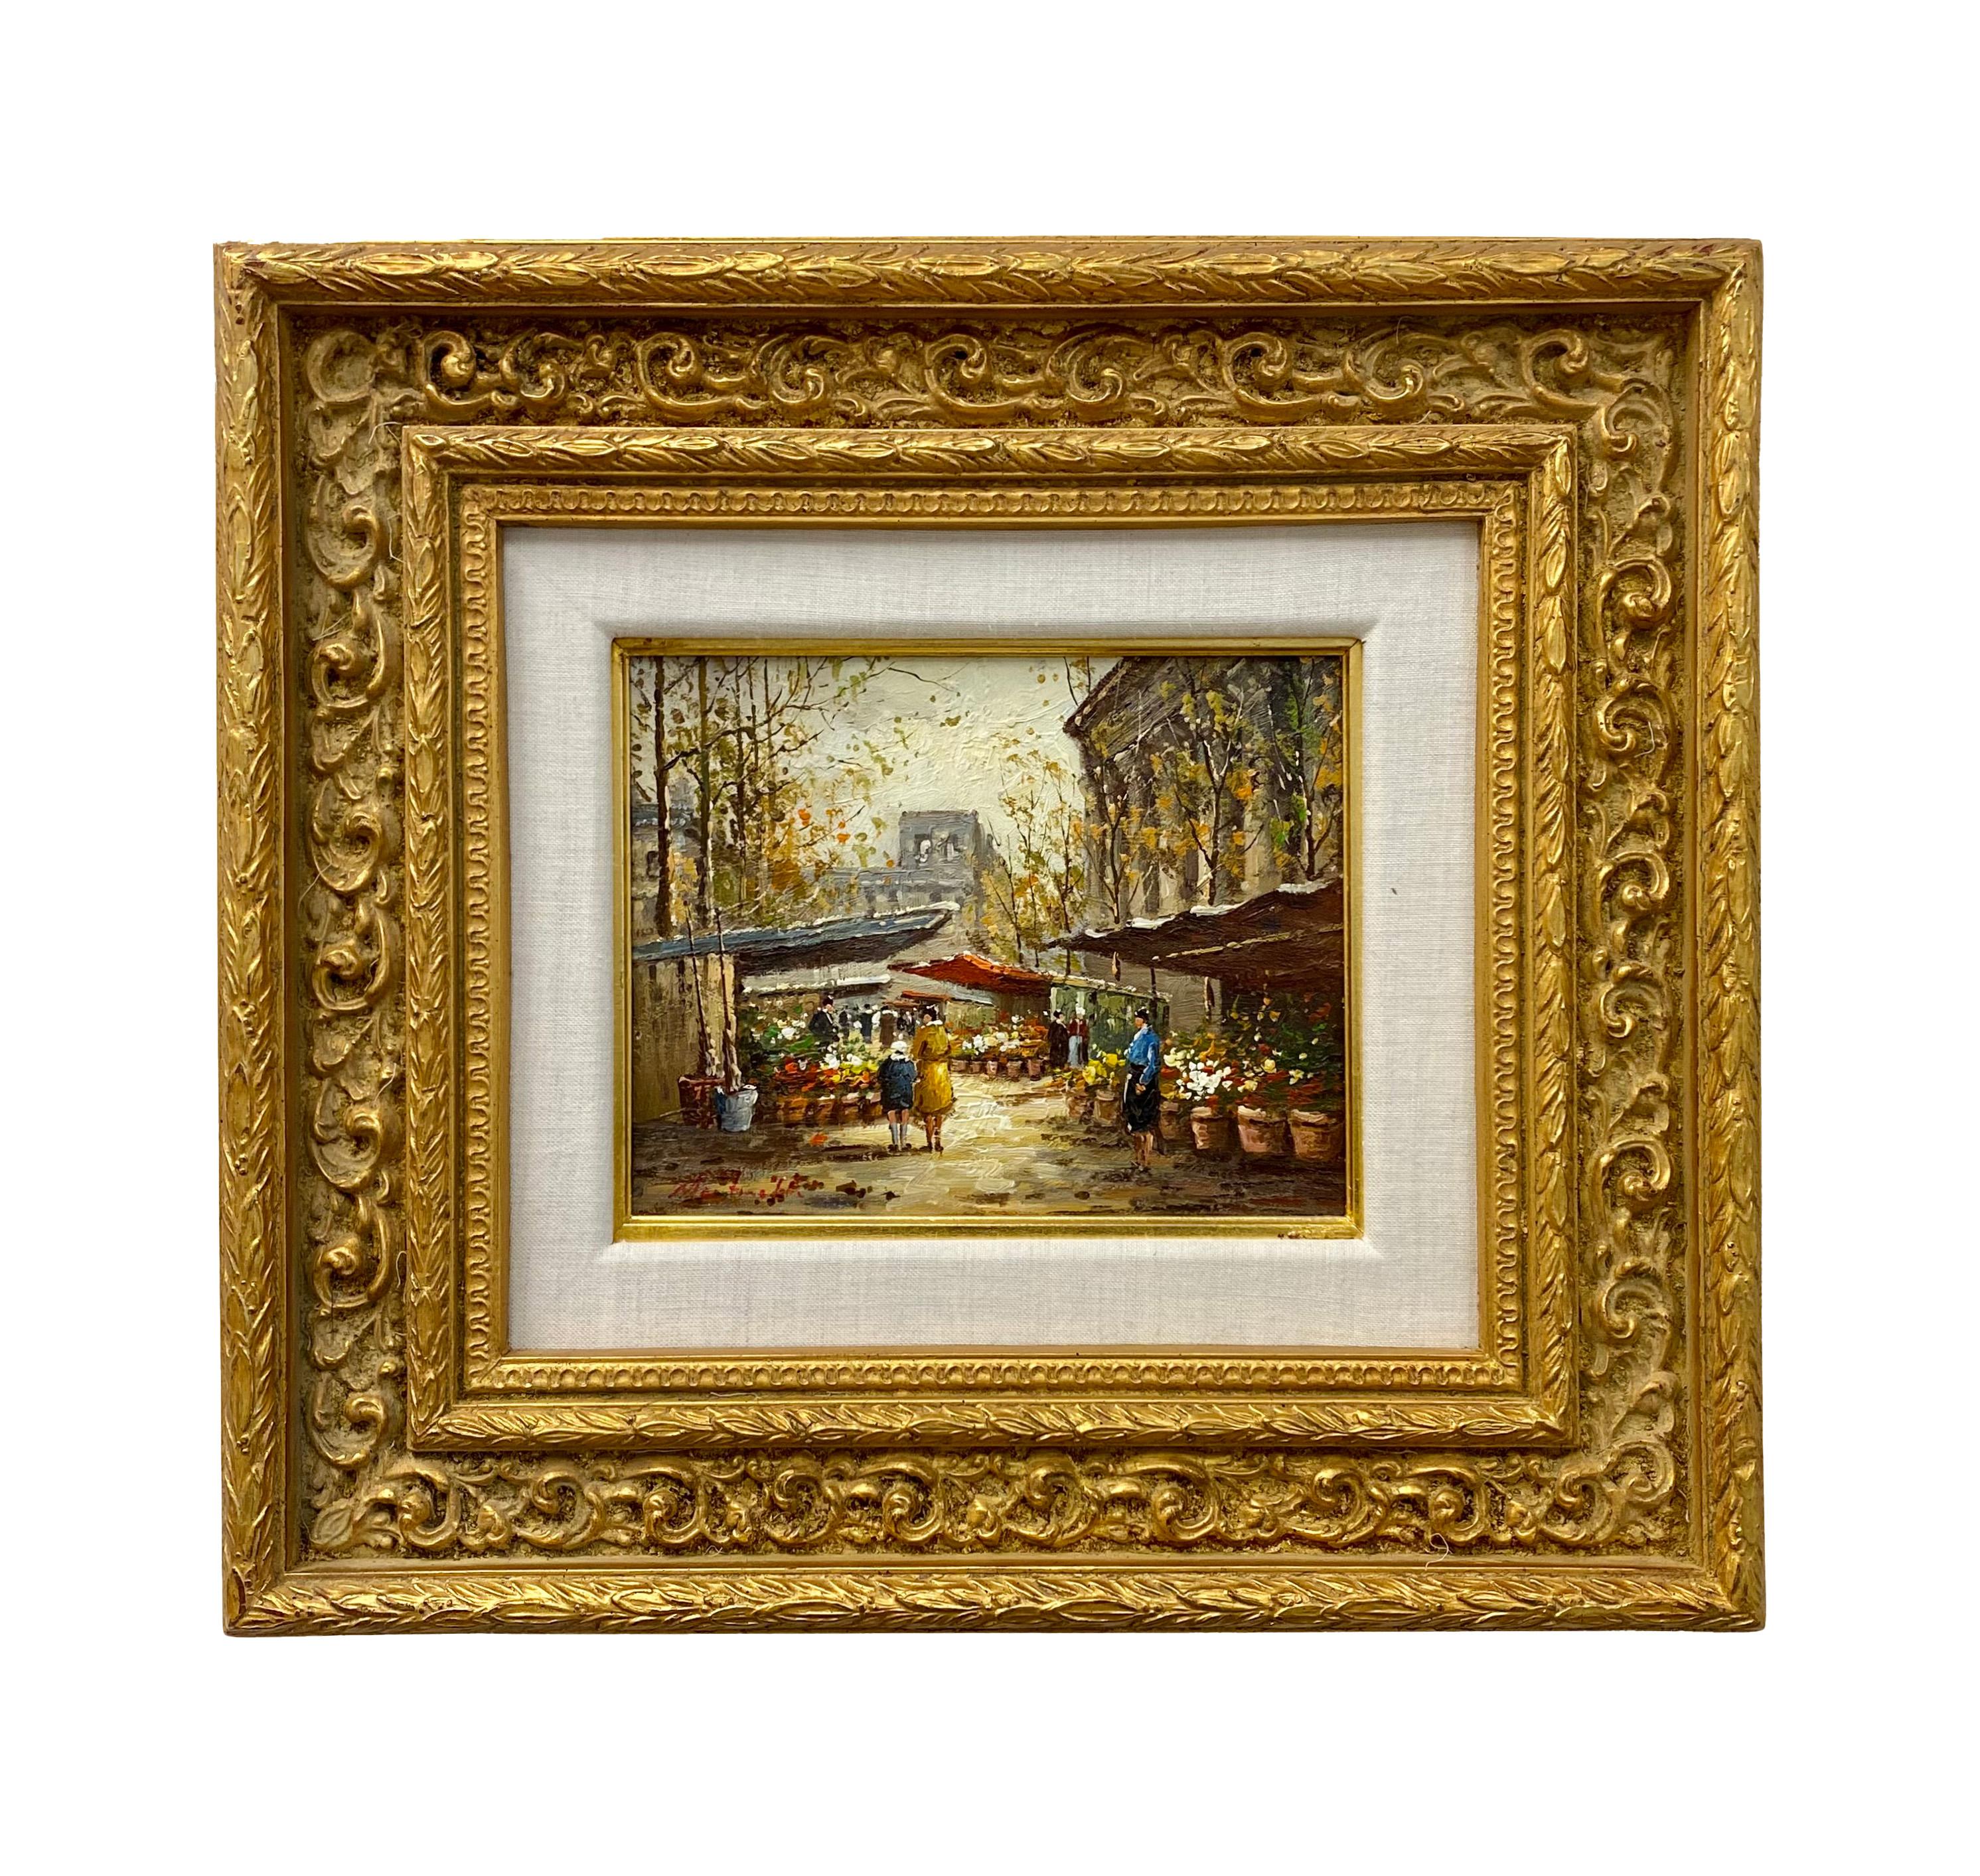 Unknown Landscape Painting - Impressionistic Oil on Canvas Painting of an Outdoor Market in the City, Signed 